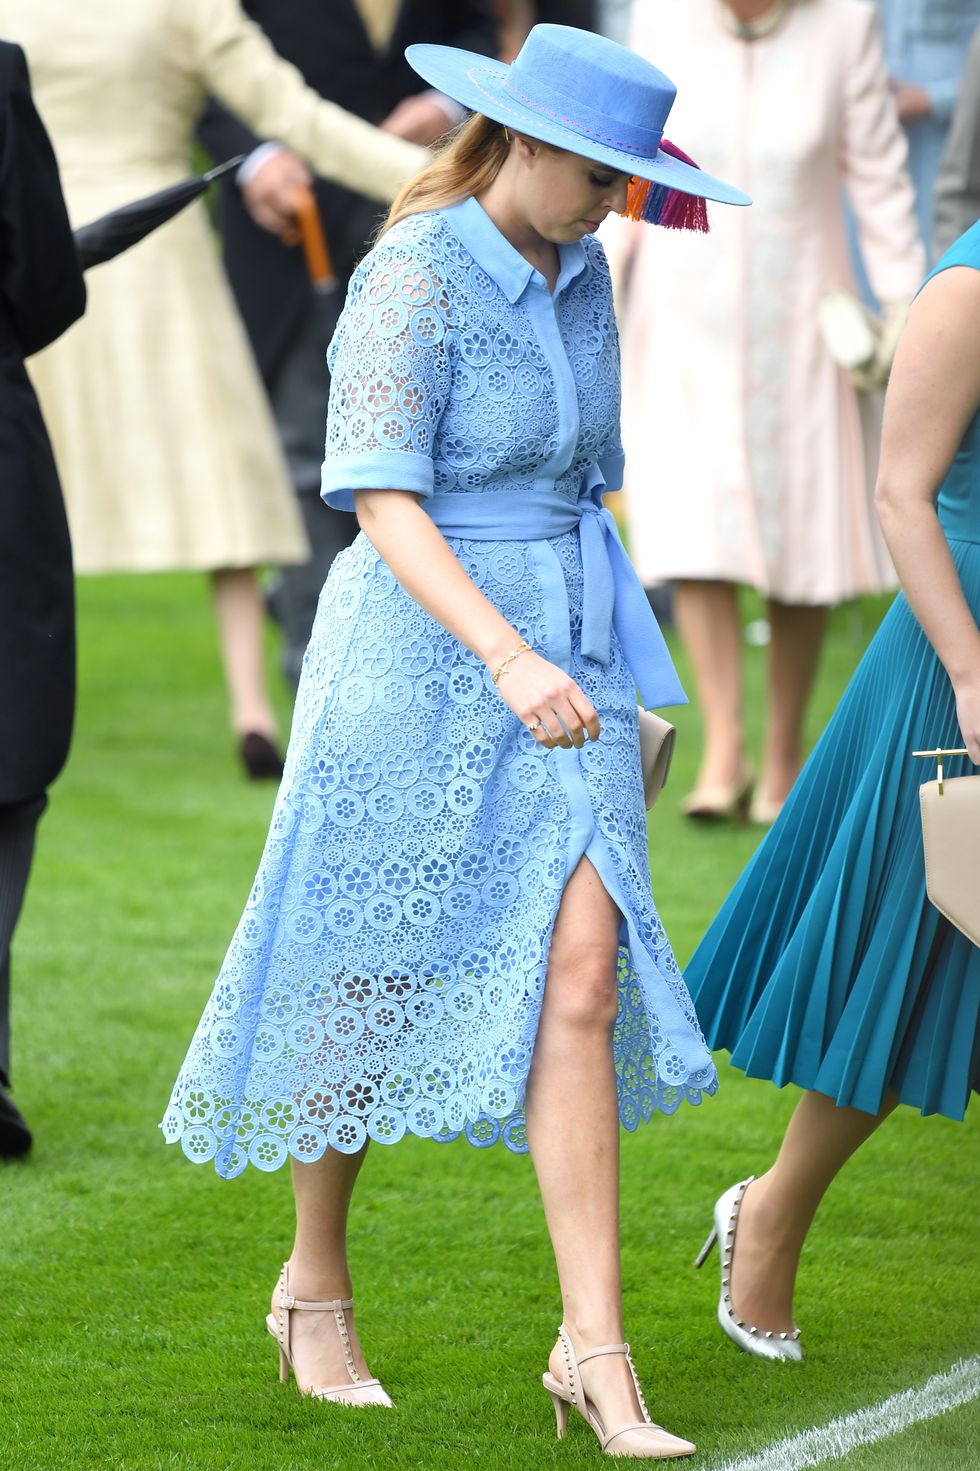 princess-beatrice-of-york-attends-day-one-of-royal-ascot-at-news-photo-1156770166-1560932583.jpg